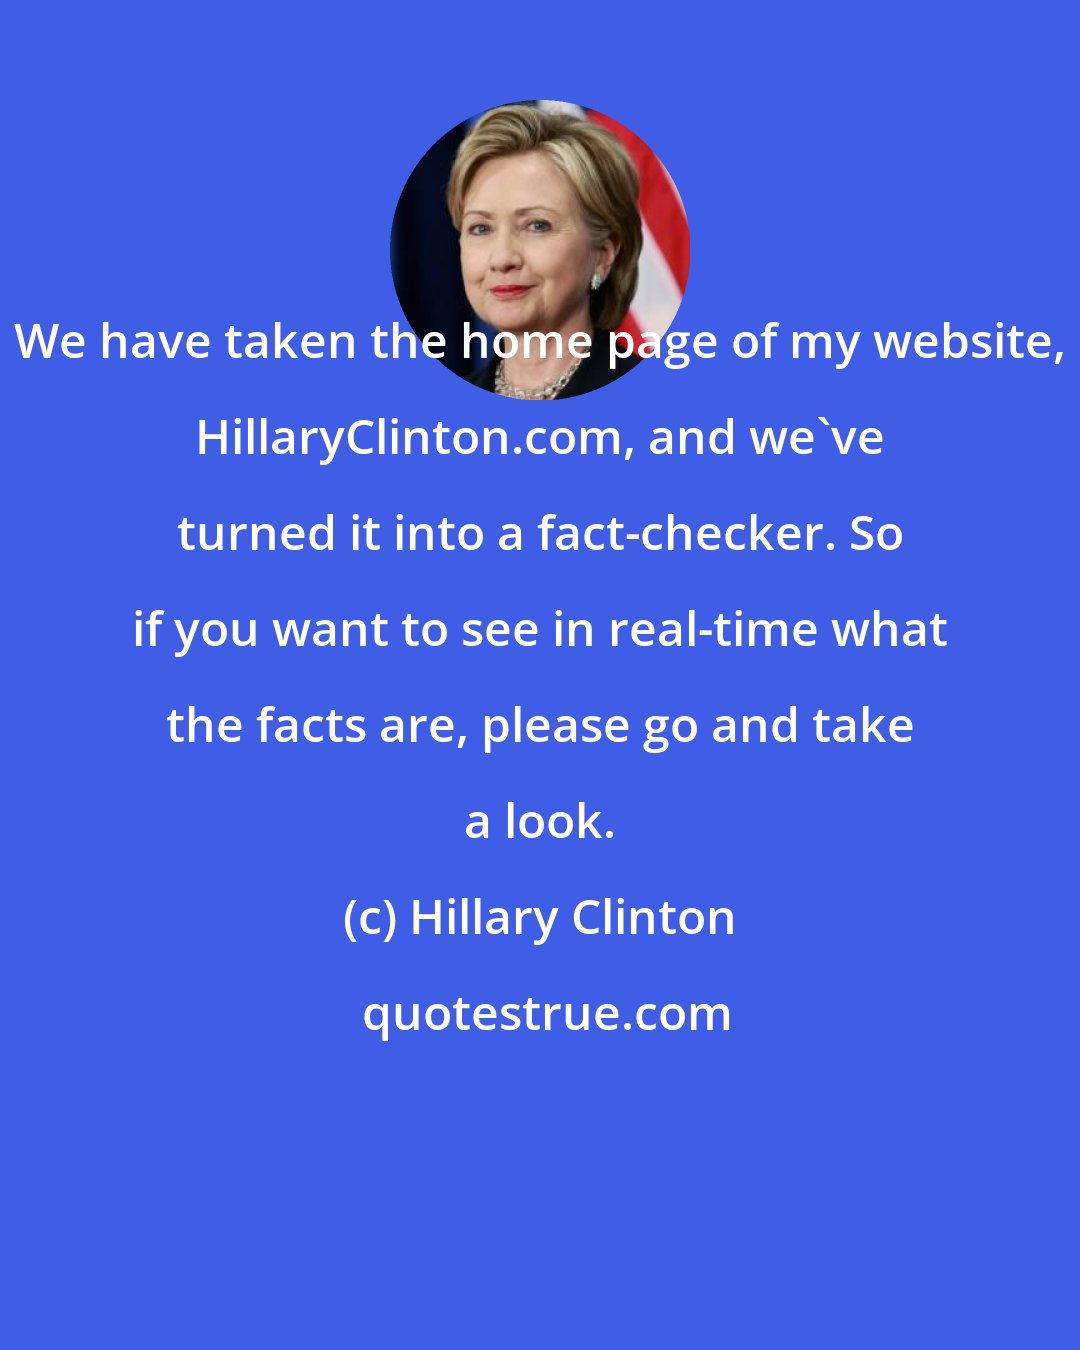 Hillary Clinton: We have taken the home page of my website, HillaryClinton.com, and we've turned it into a fact-checker. So if you want to see in real-time what the facts are, please go and take a look.